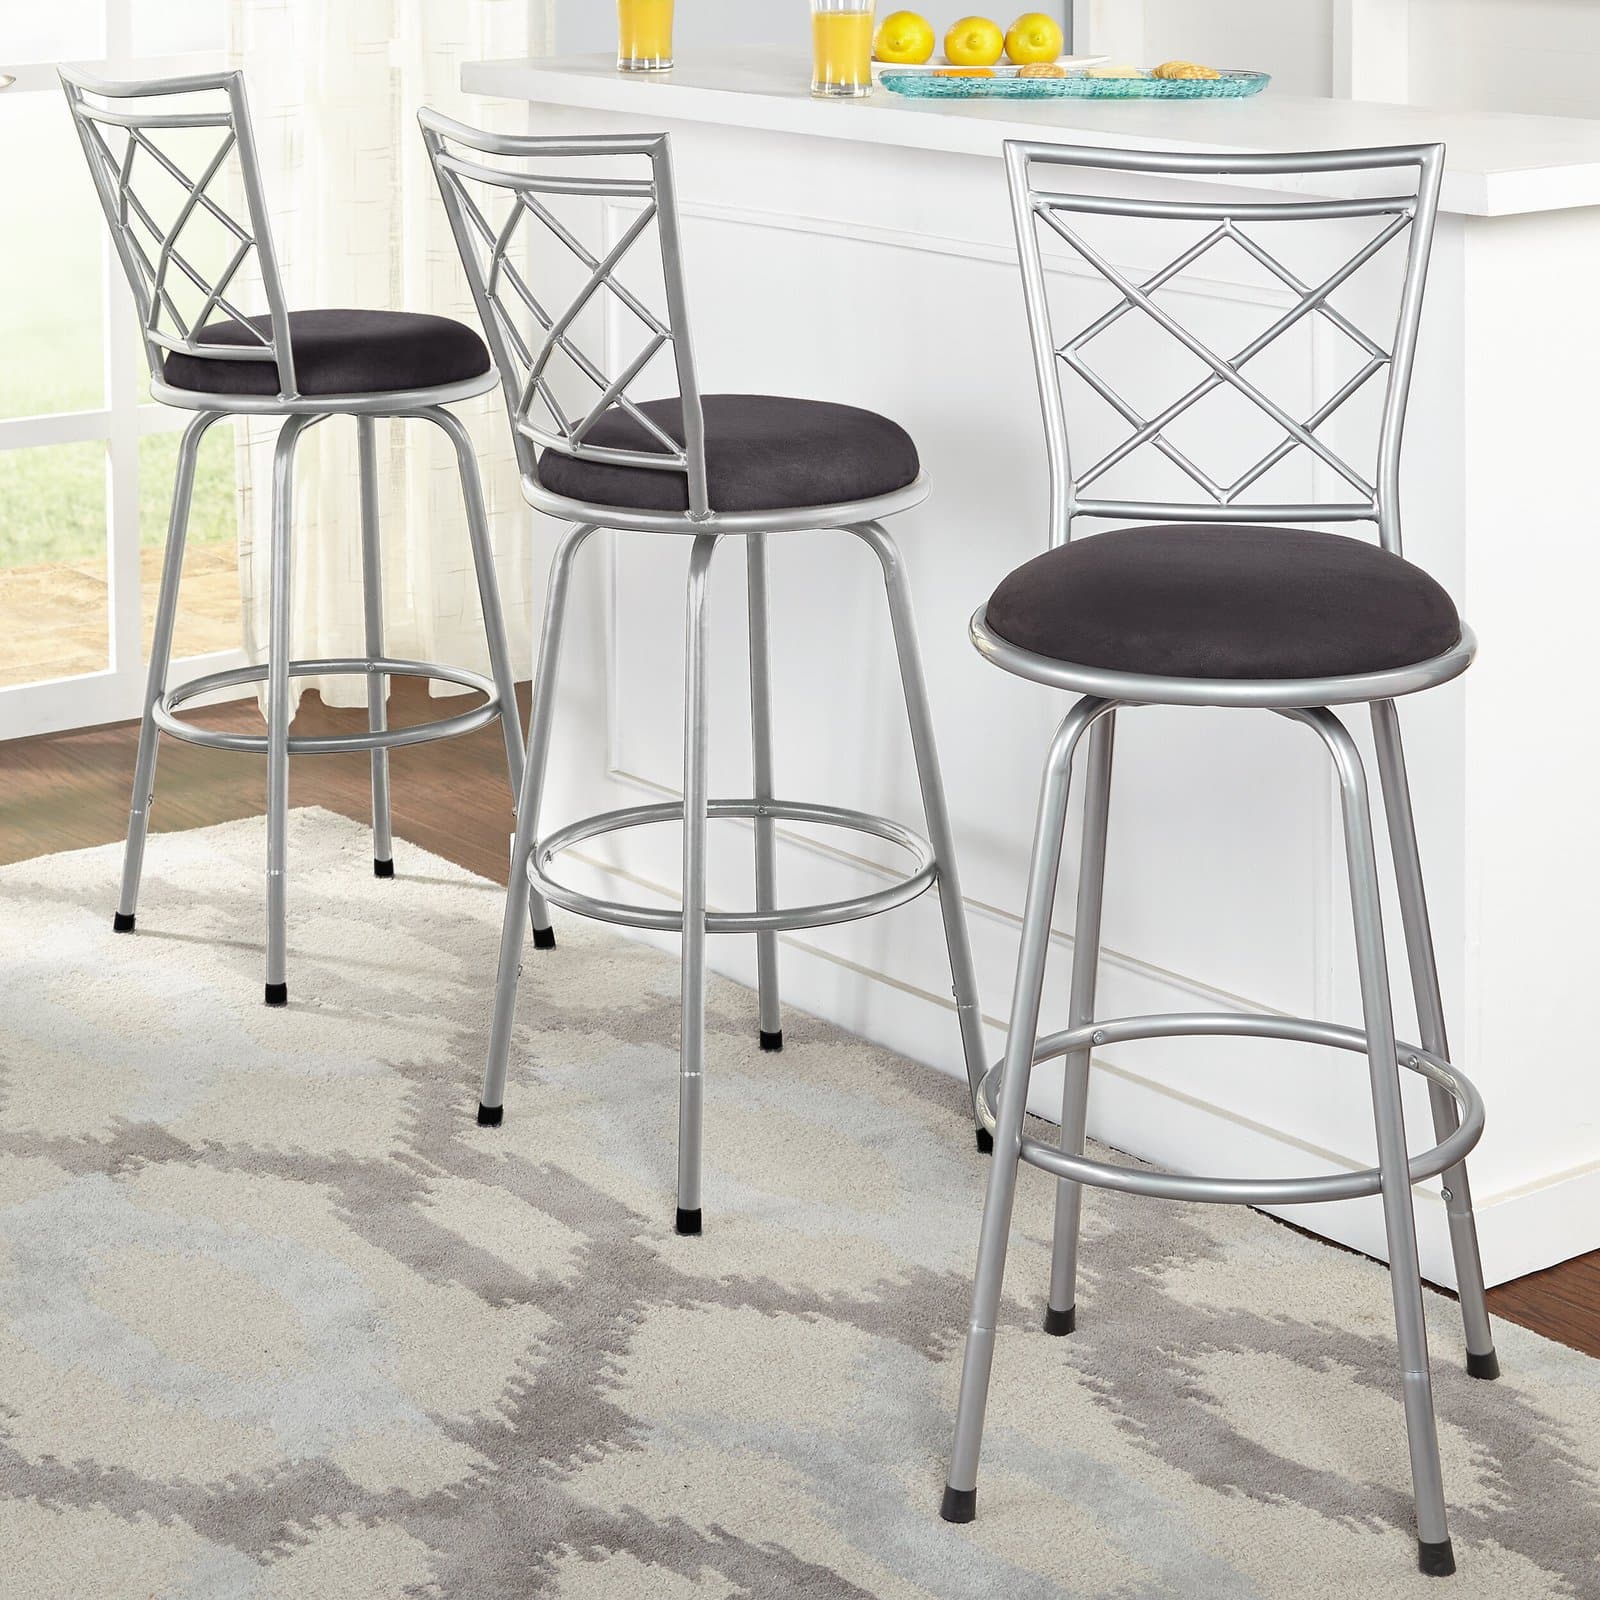 Dining Chair Style Kitchen Island Stools With Backs